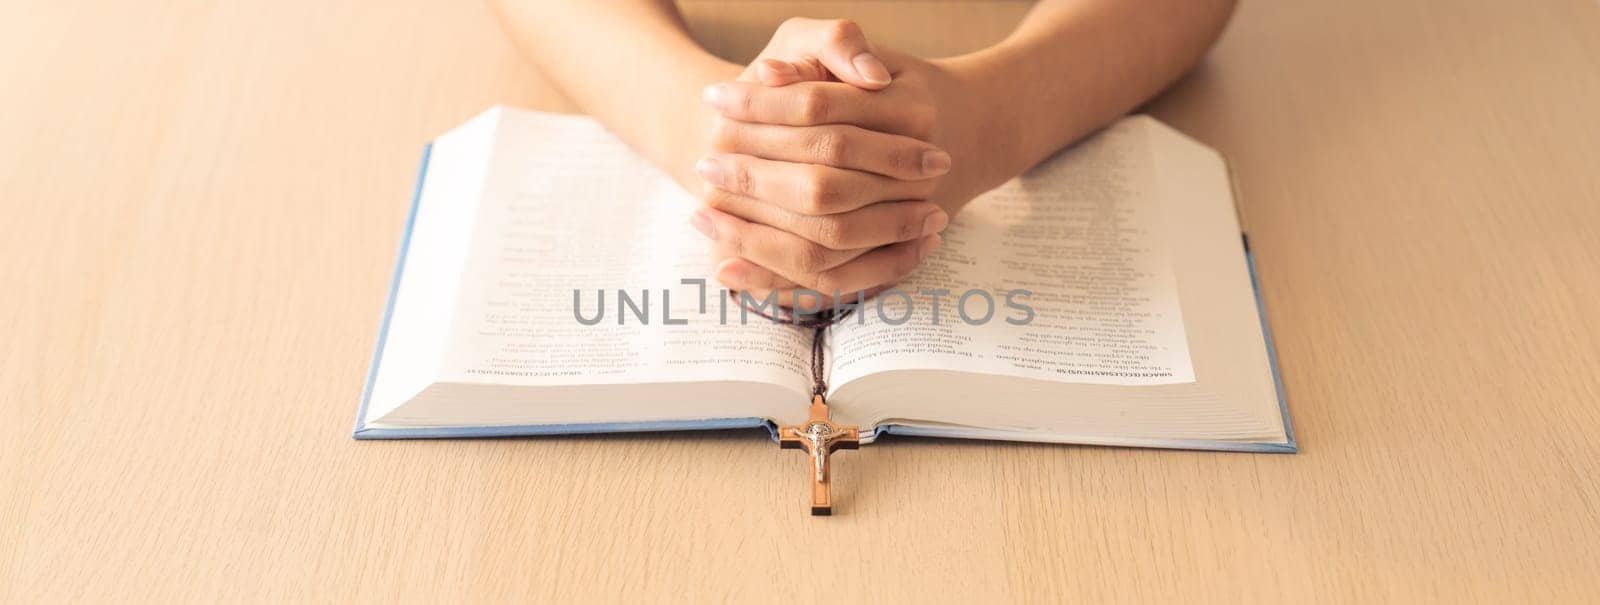 Praying male hand holding cross on holy bible book at wooden table. Burgeoning. by biancoblue